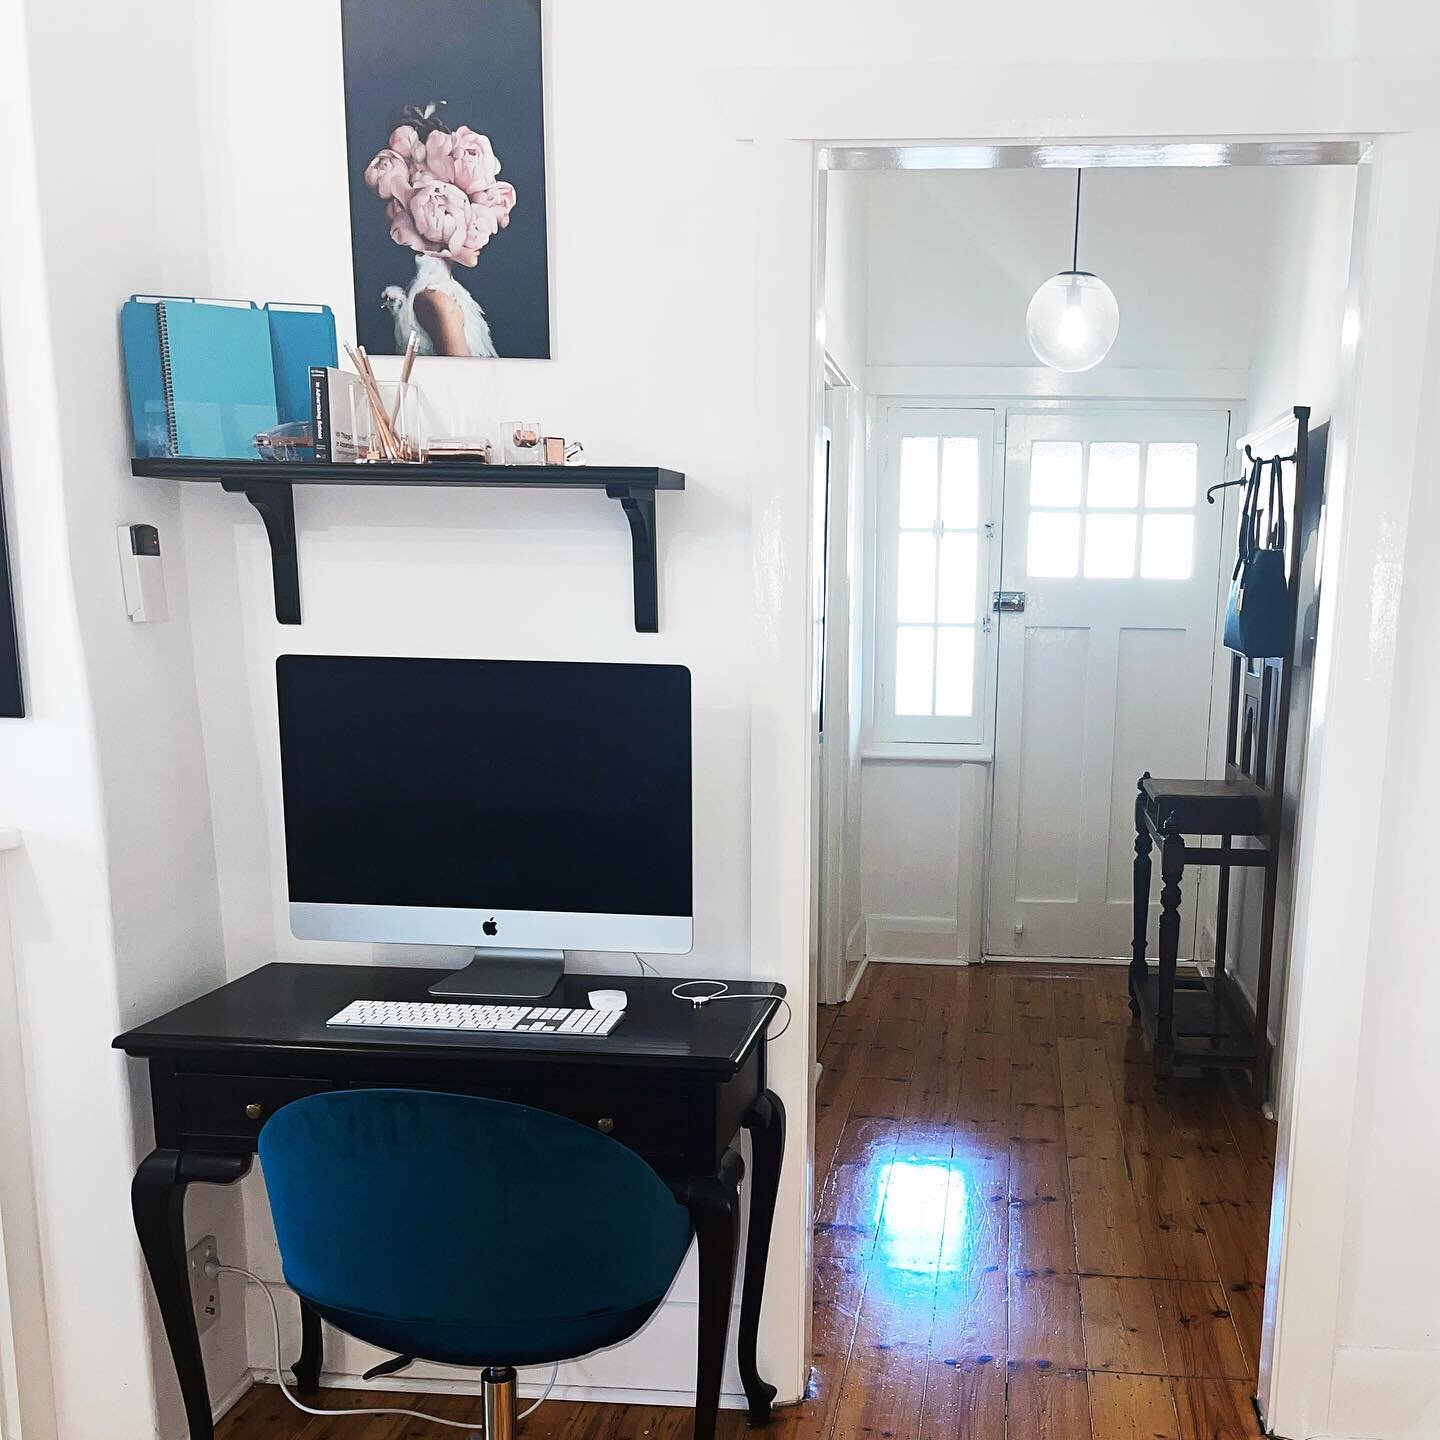 This little nook is where I write words. Good thing about copywriting is that most of it happens in that small space between my ears, so the rent is cheap ;)